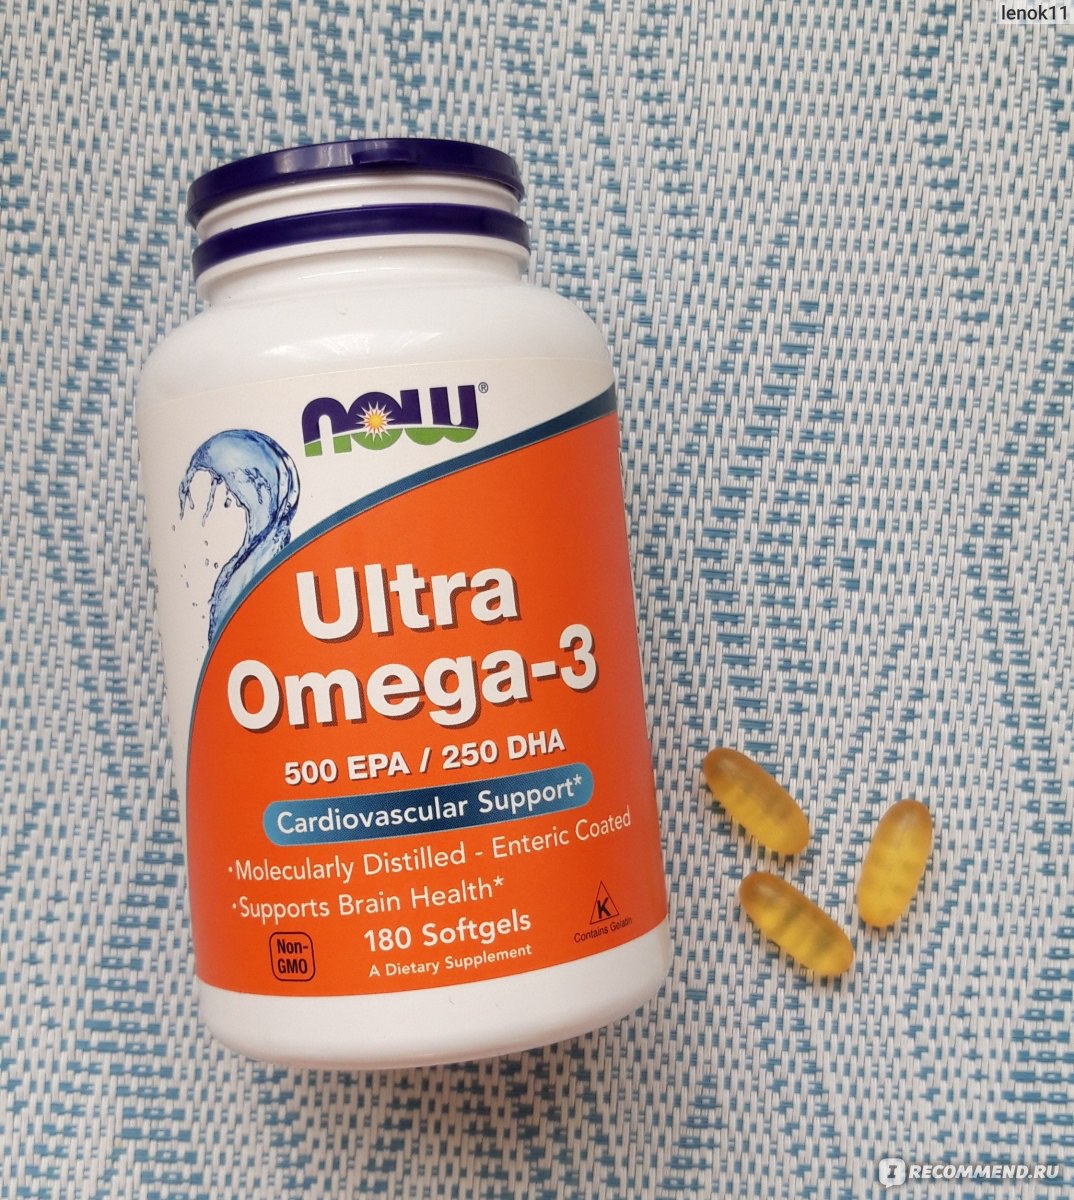 Ultra omega 3 капсулы now. Омега 3 Now Ultra Omega 1000мг (500/250). Омега 3 Now 500 капсул. Омега 3 капсулы Now foods. Омега 3 ПНЖК Now foods.